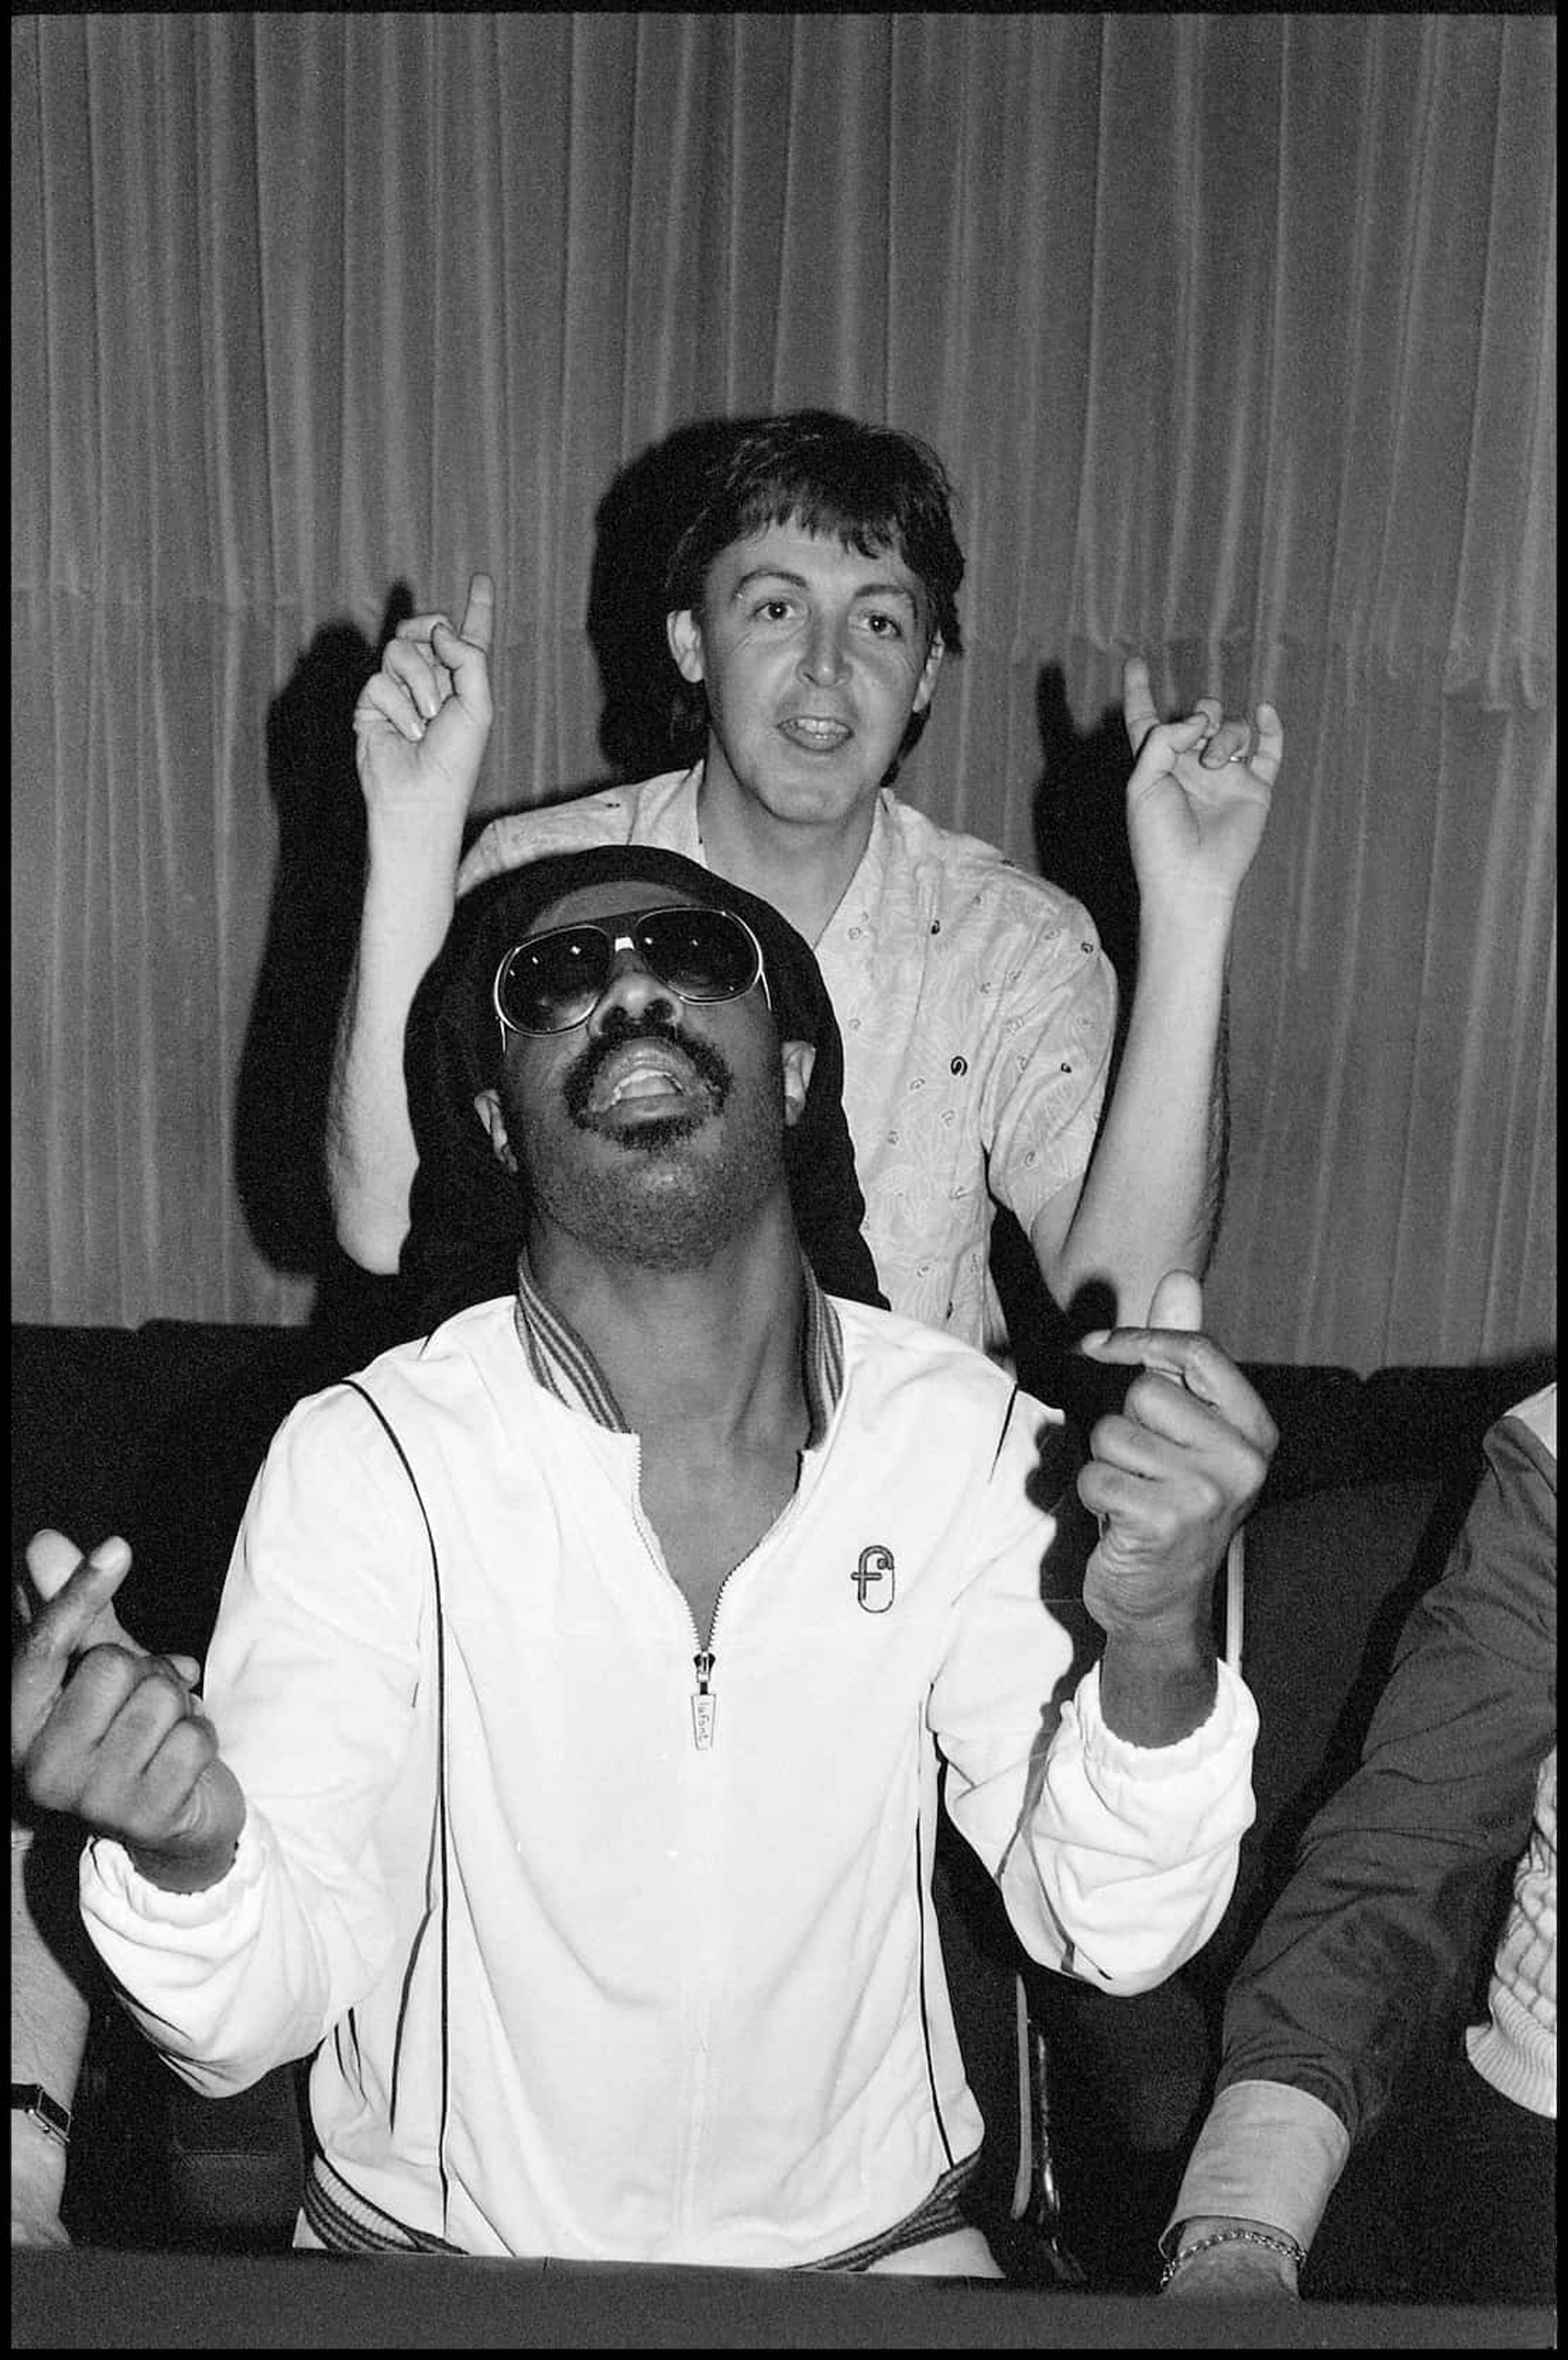 Paul and Stevie Wonder during the 'Tug Of War' recording sessions.